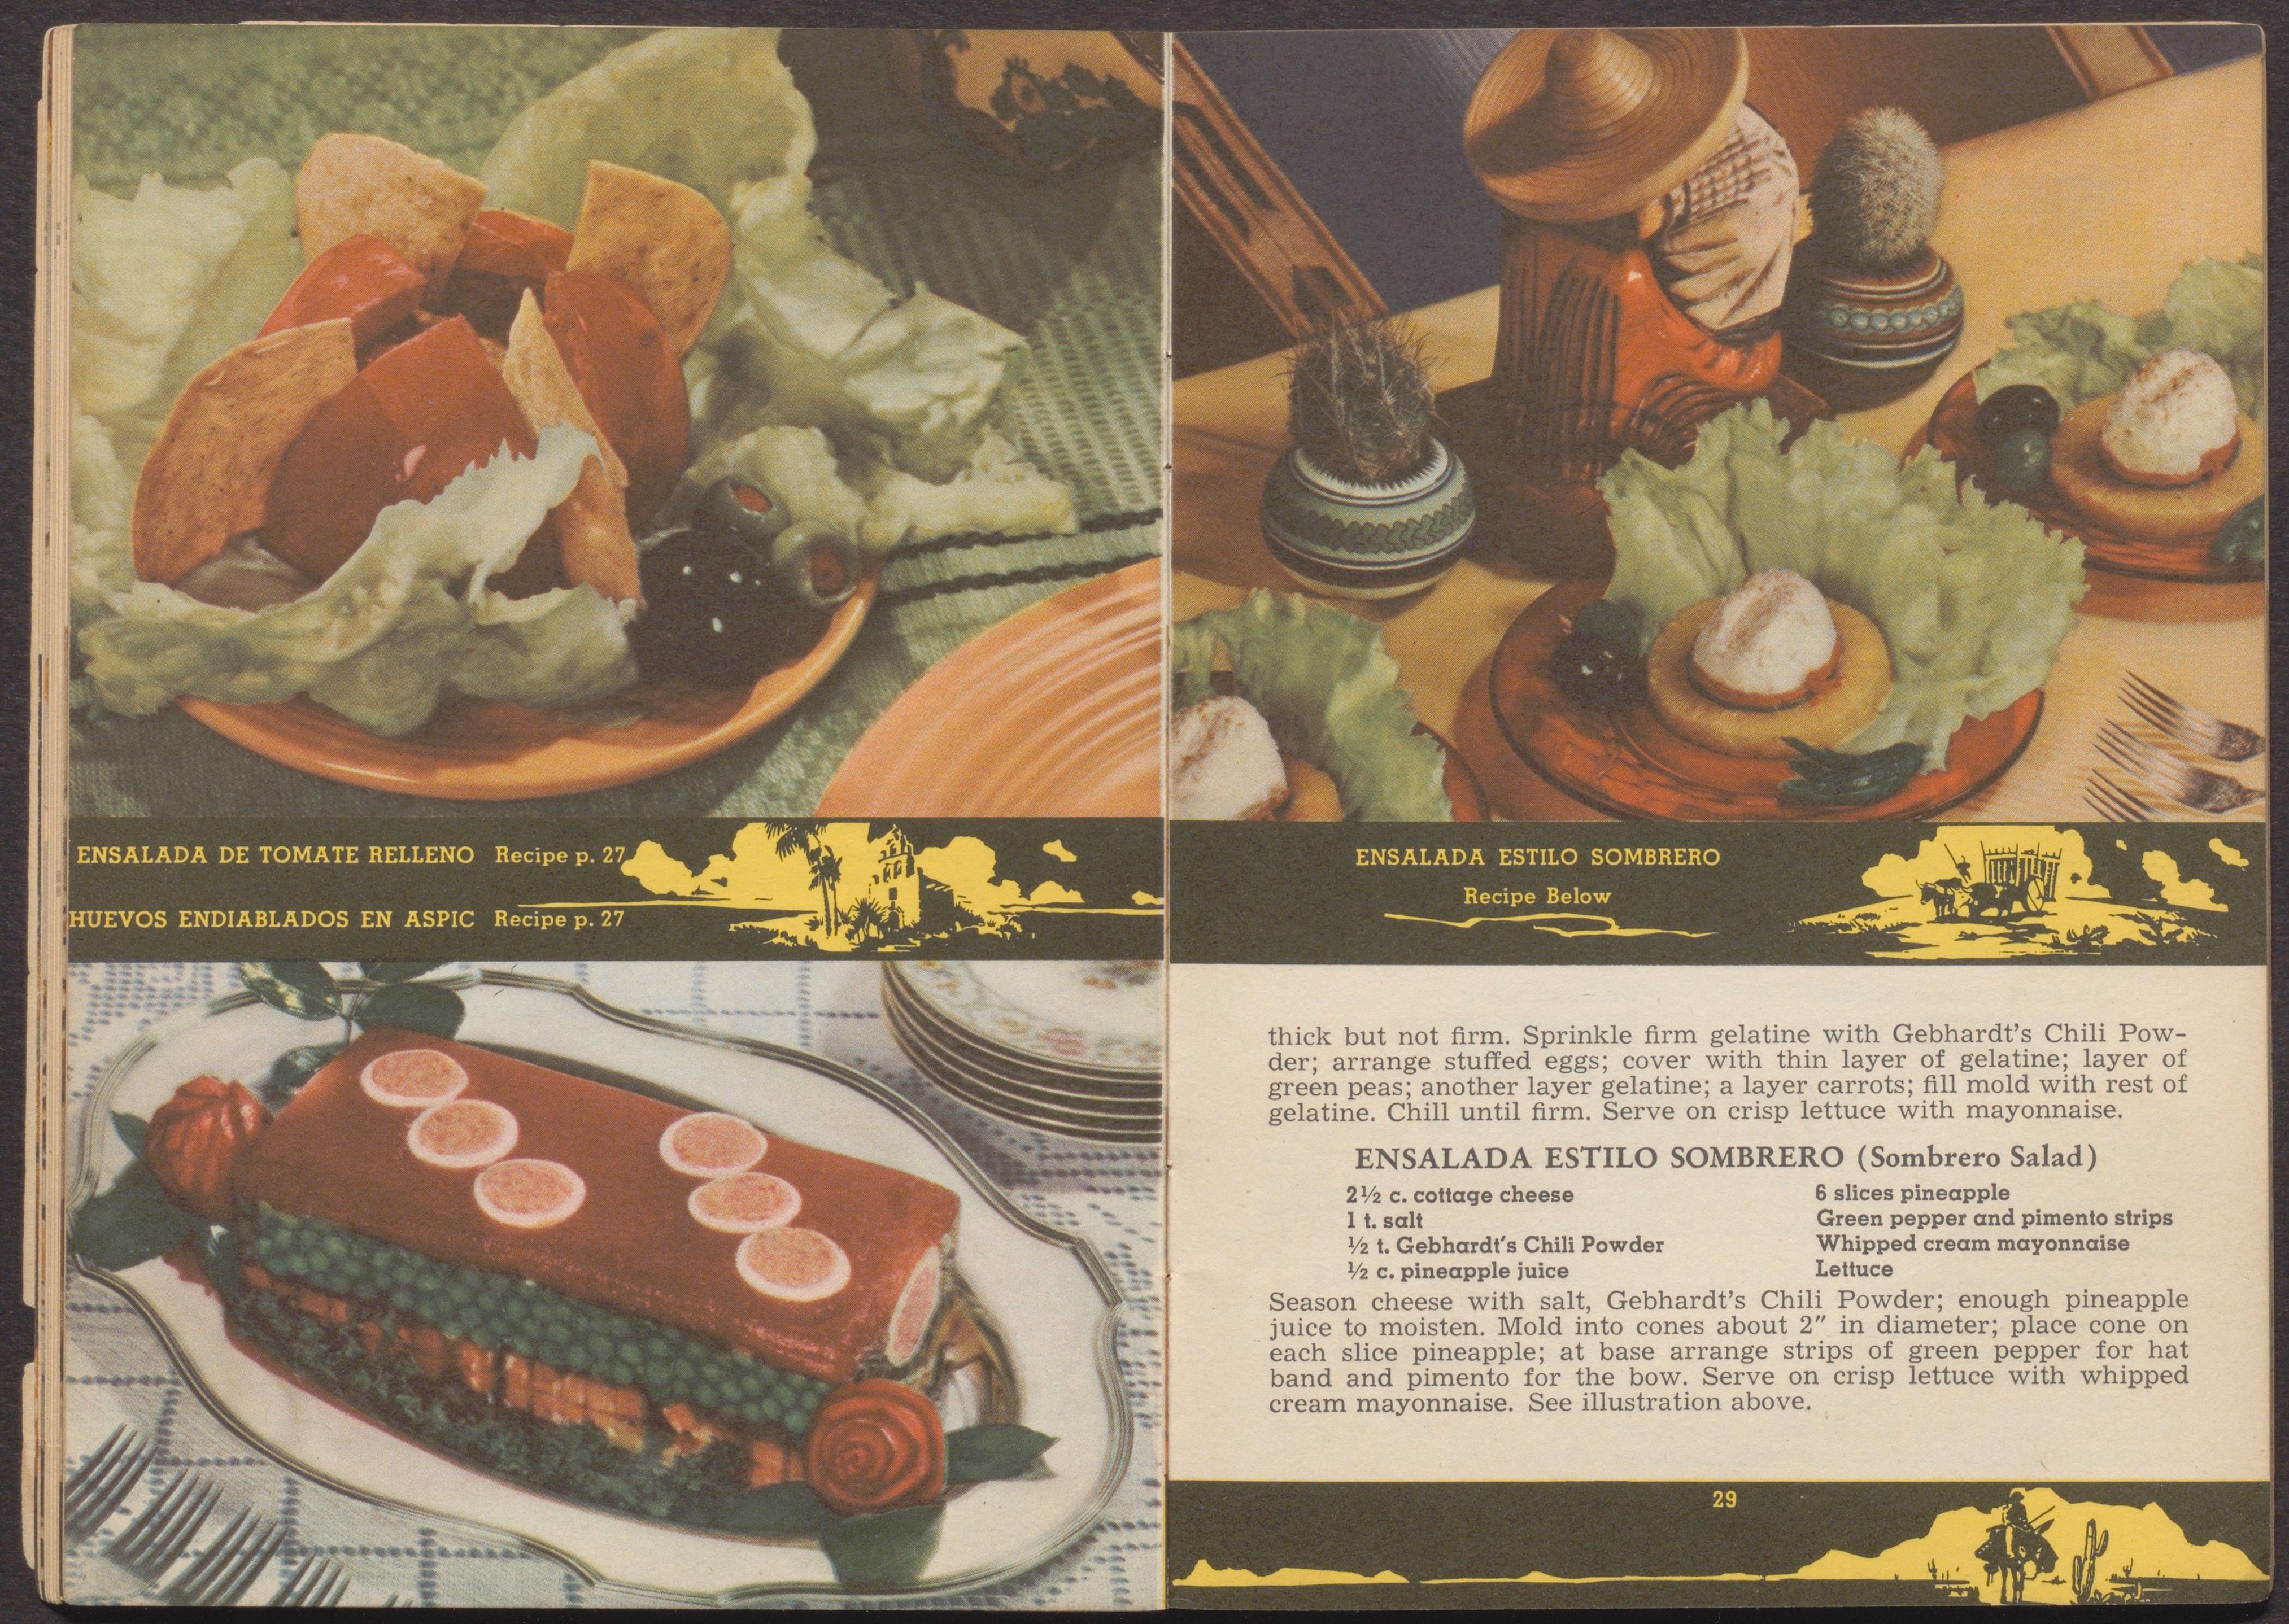 Pages from an open cookbook, showing three dishes and part of a recipe for 'Sombrero Salad'.